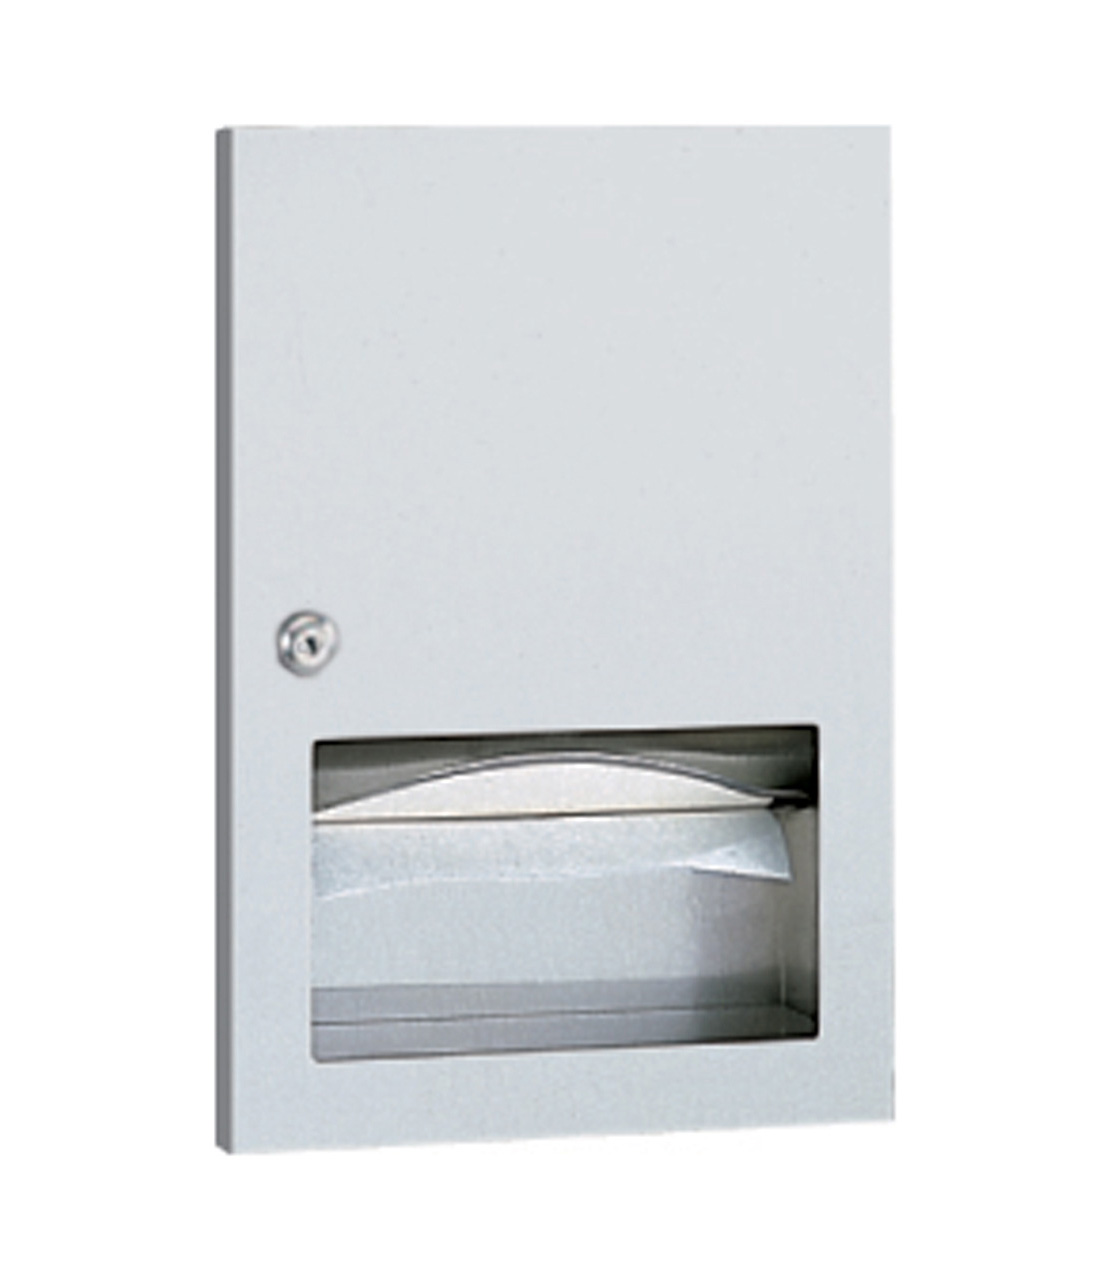 Coverall Recessed Towel Dispenser - (Model #: td-6) Image